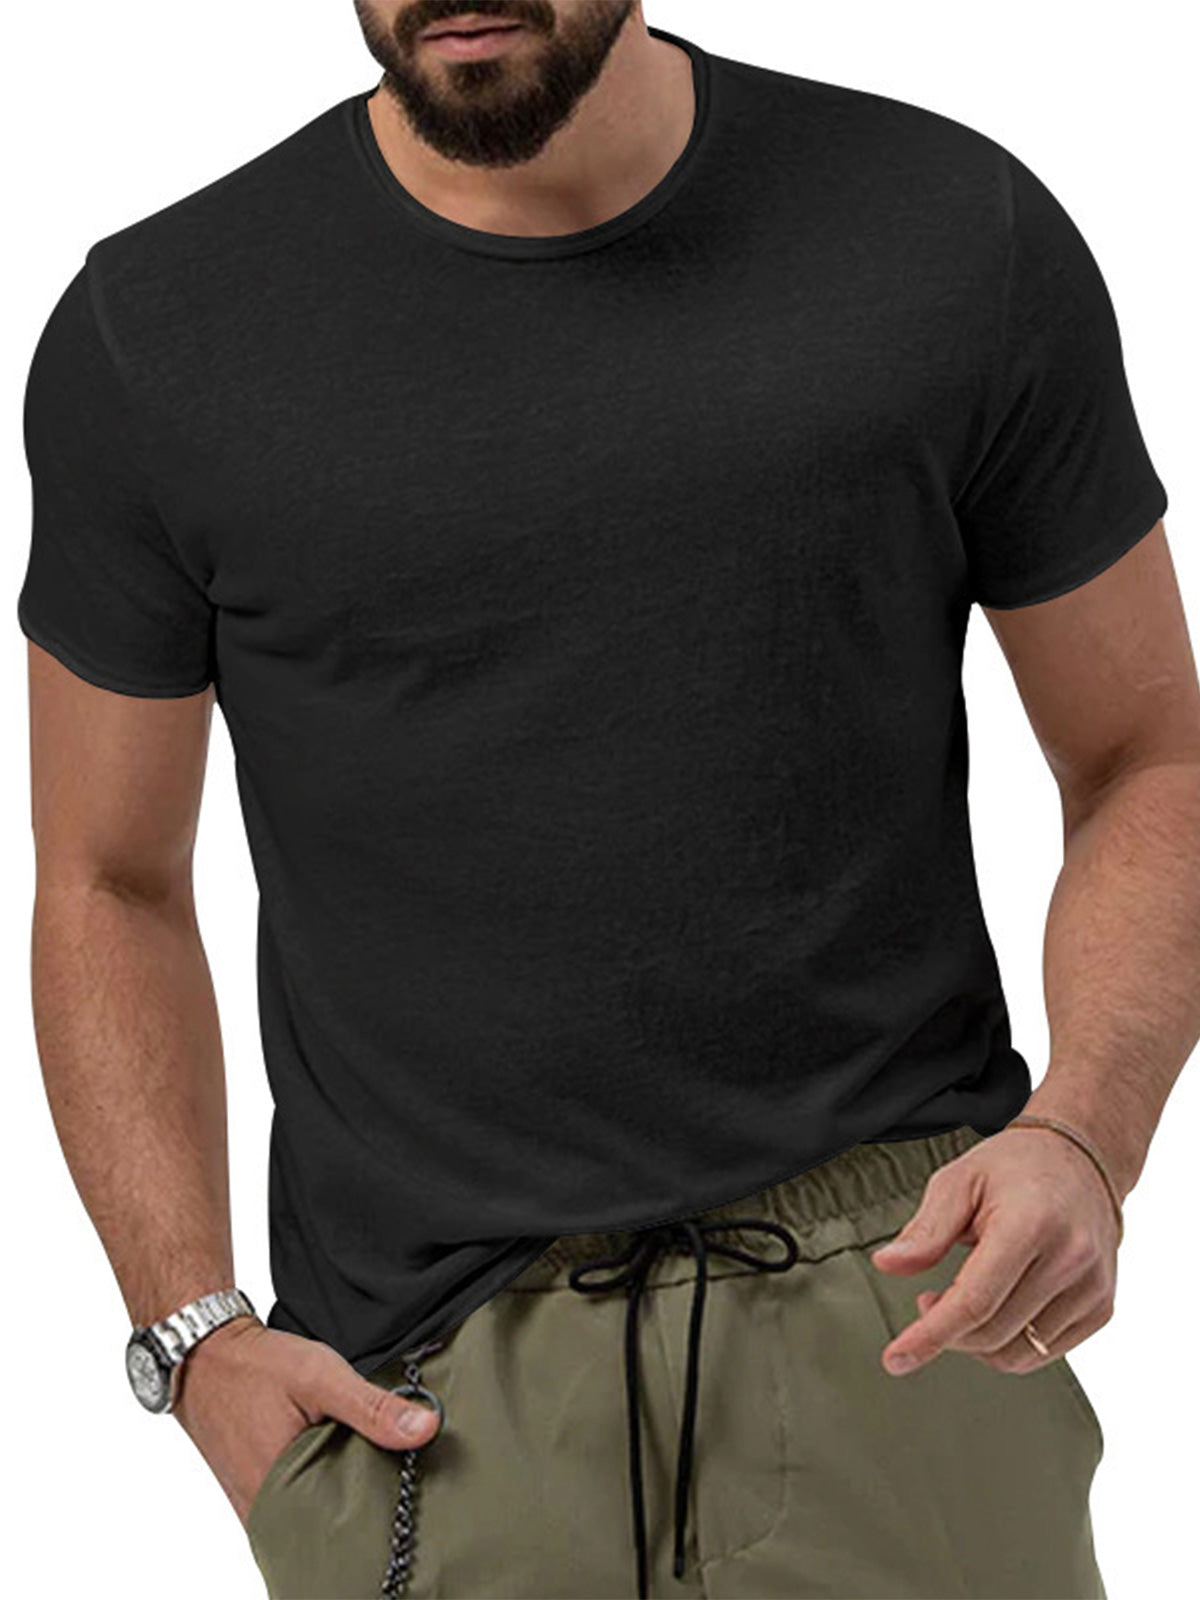 Men's Solid Color Breathable Round Neck Short Sleeve T-Shirt